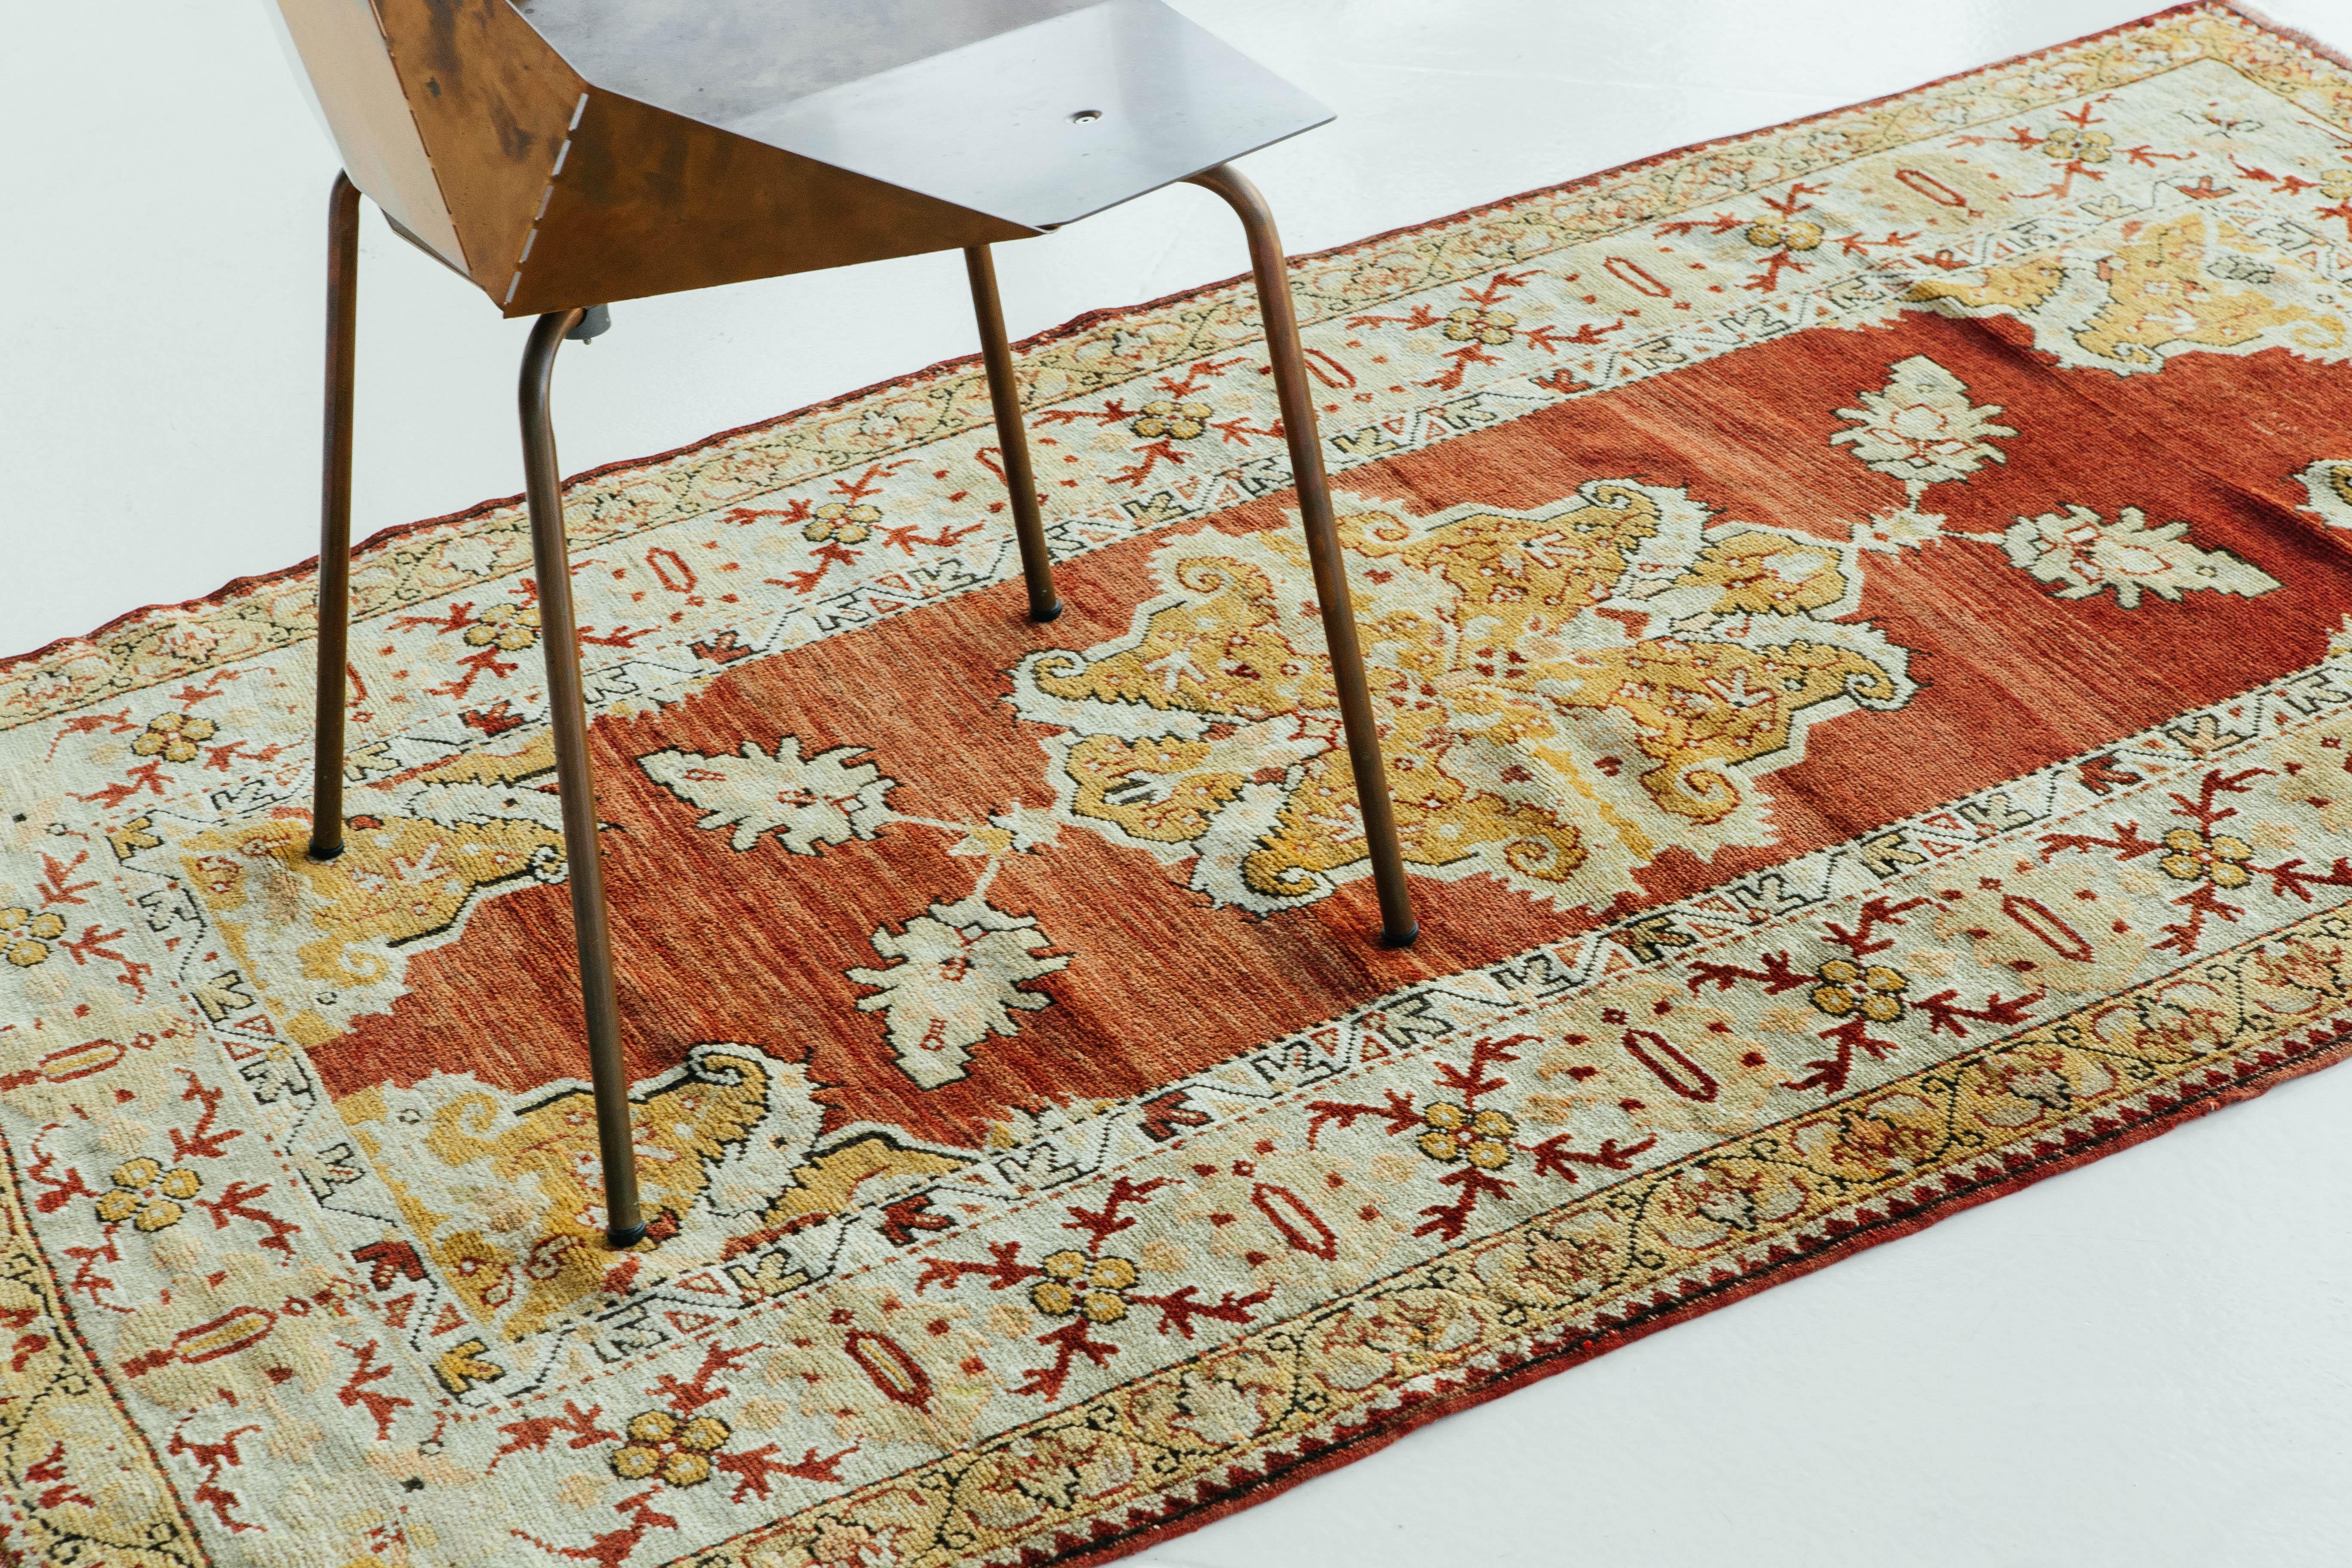 A bold and intricately made vintage Turkish Anatolian rug. Beautiful cherry red and saffron colors make a statement meanwhile the Anatolian signature medallion takes center stage. Vintage Turkish Anatolian rugs weave together dyes and colors,